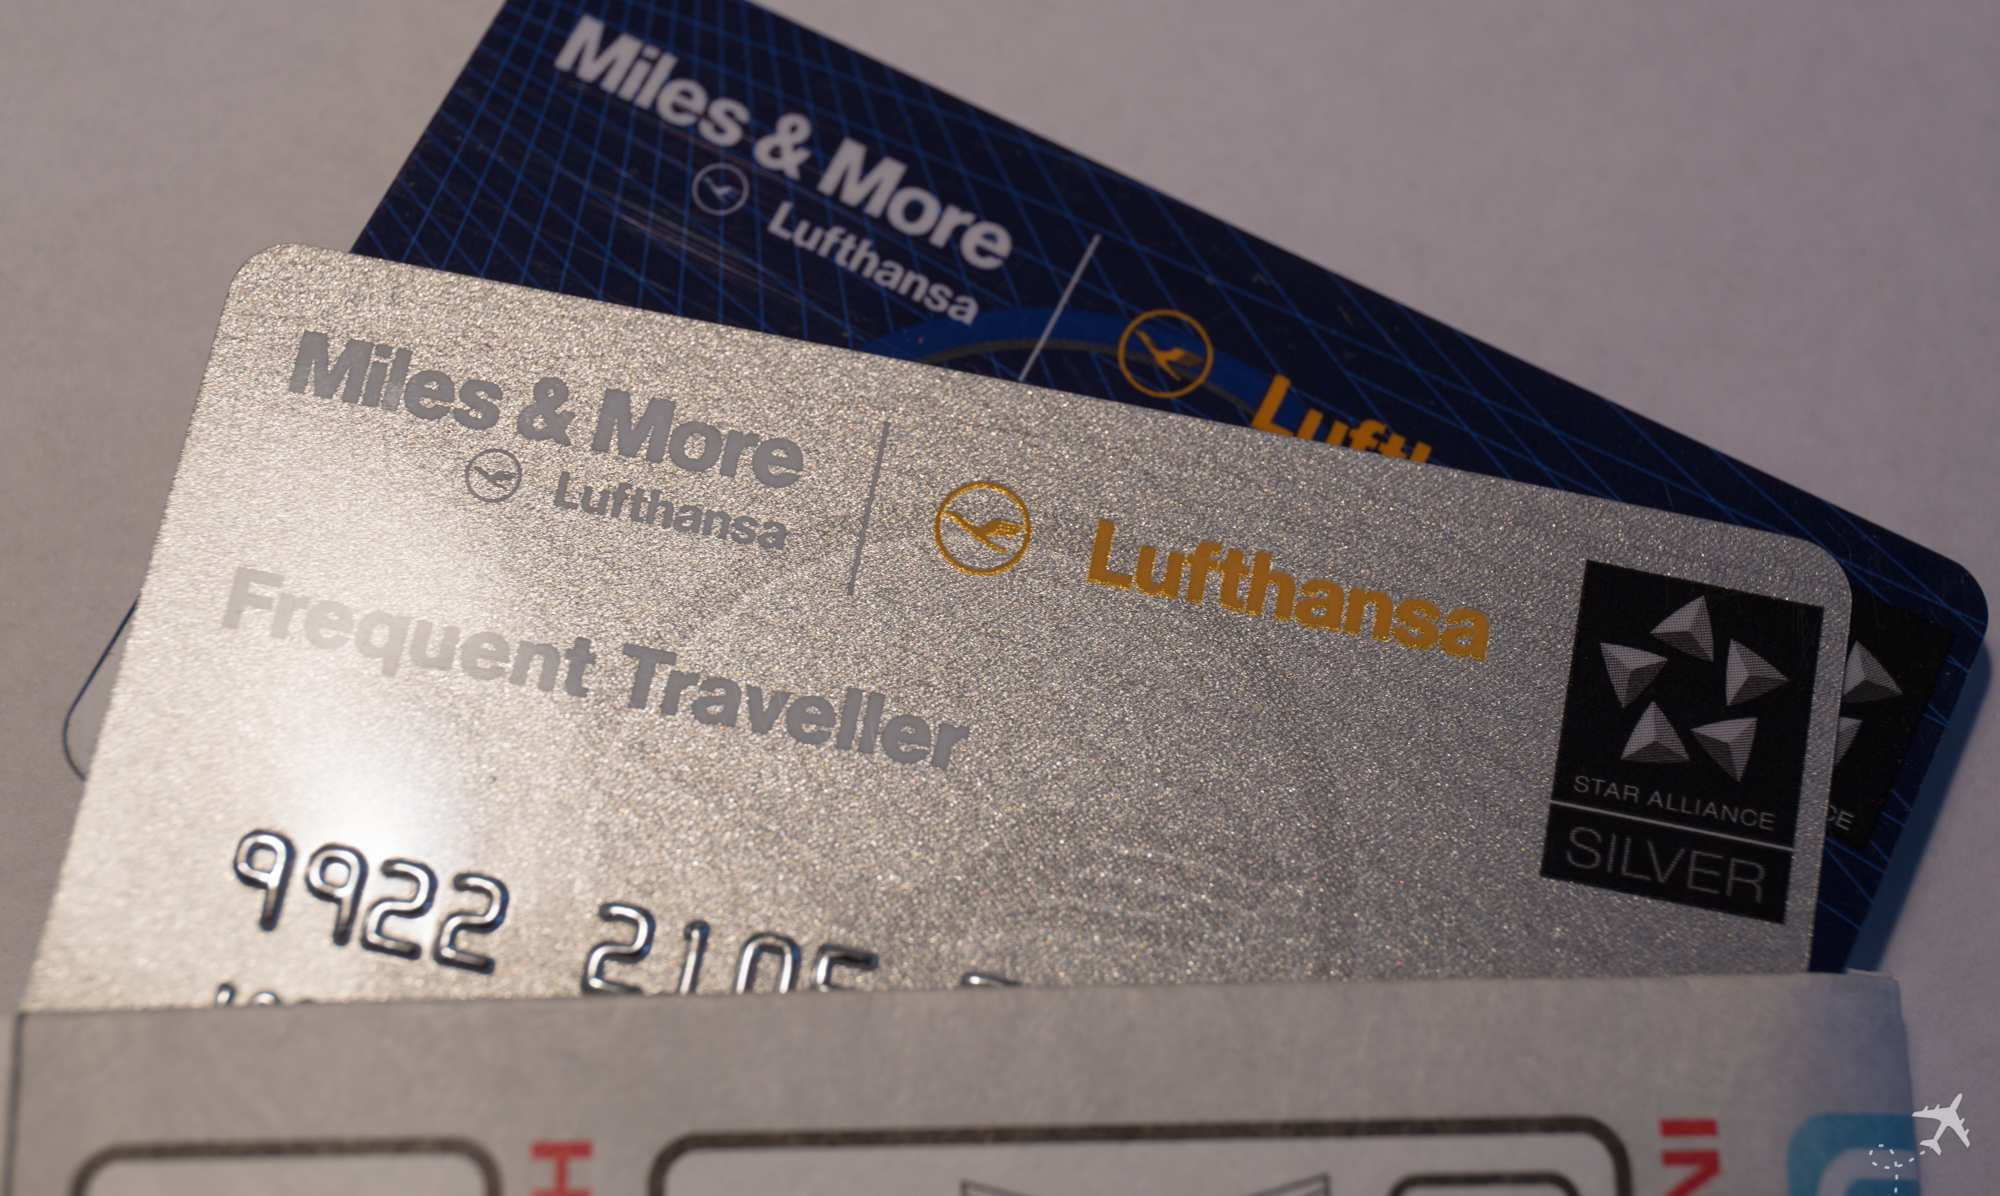 frequent traveller card miles and more